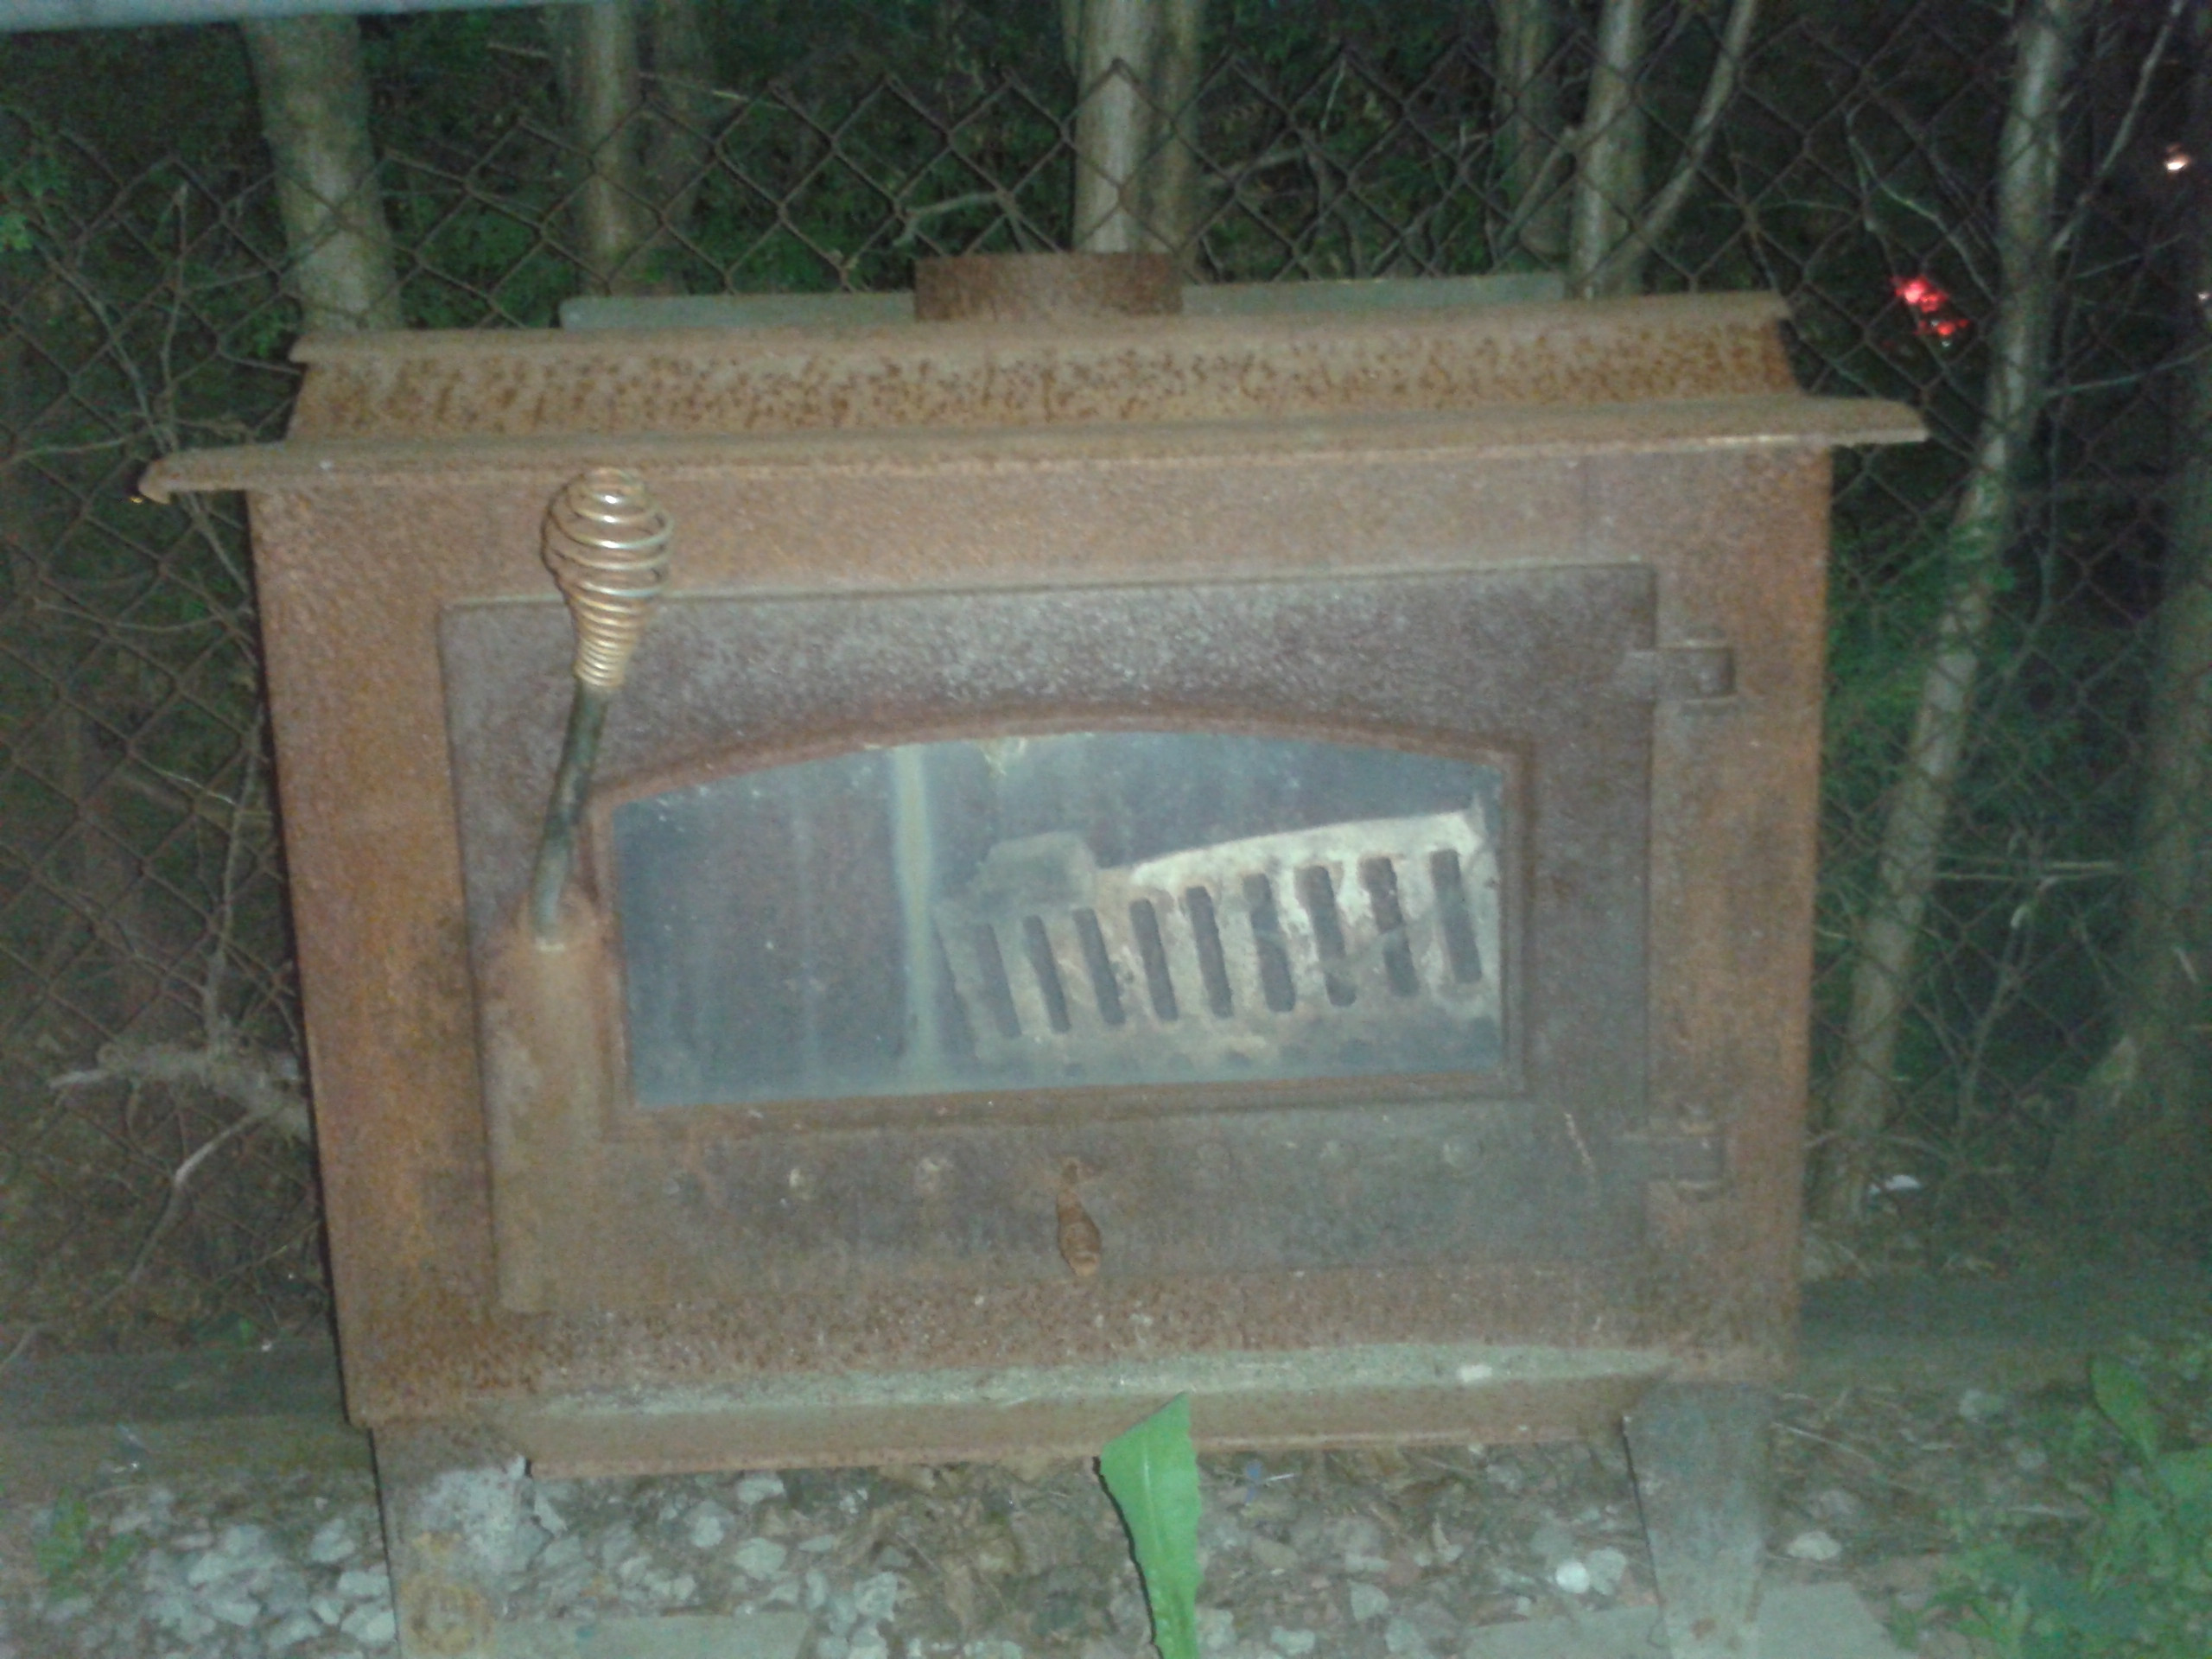 Restoring a "not-so-old" stove